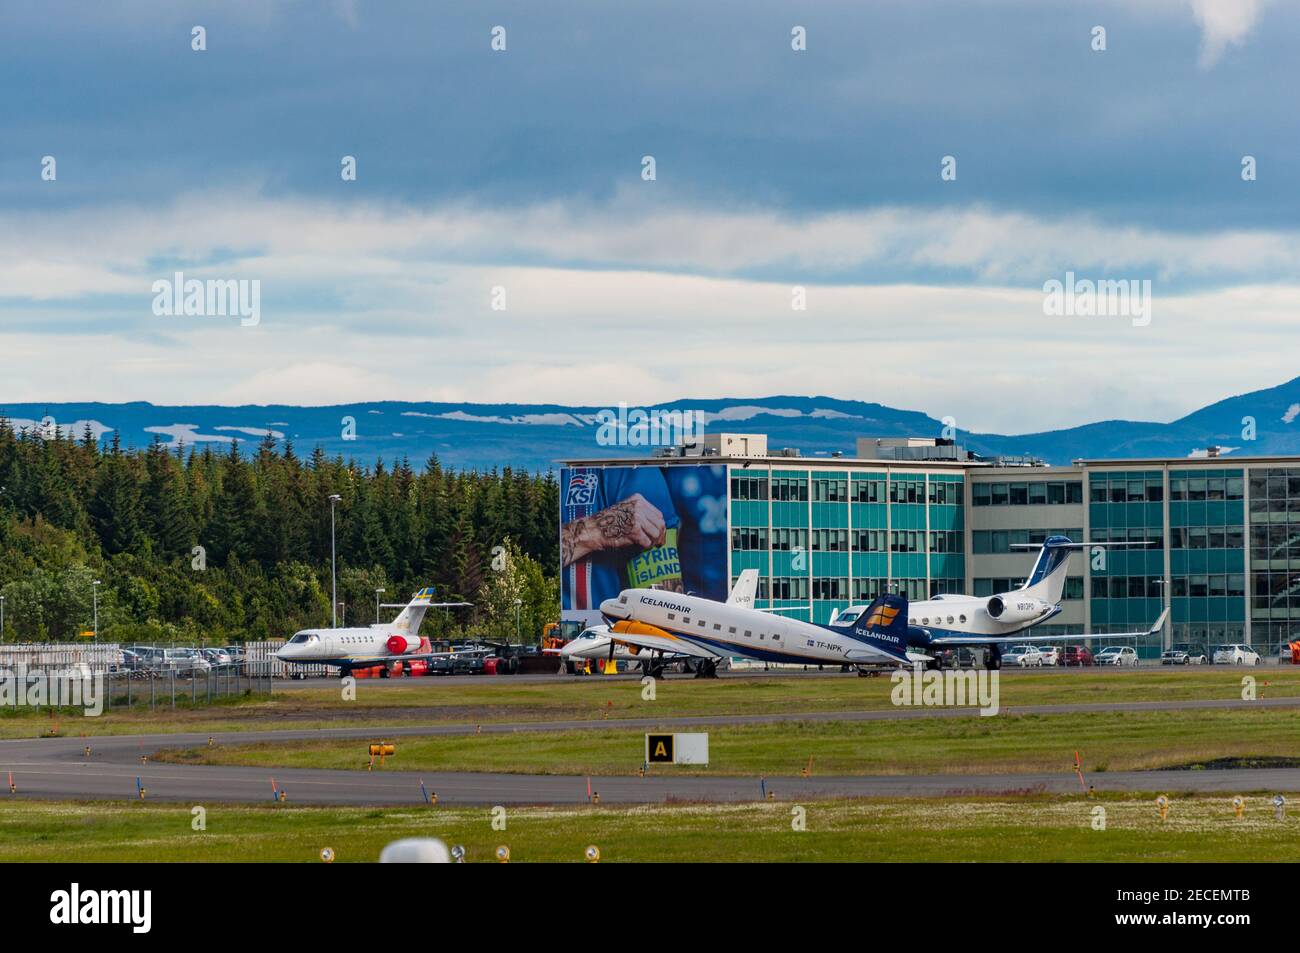 Reykjavik Iceland - July 2. 2016: airplanes located at Reykjavik airport in Iceland Stock Photo